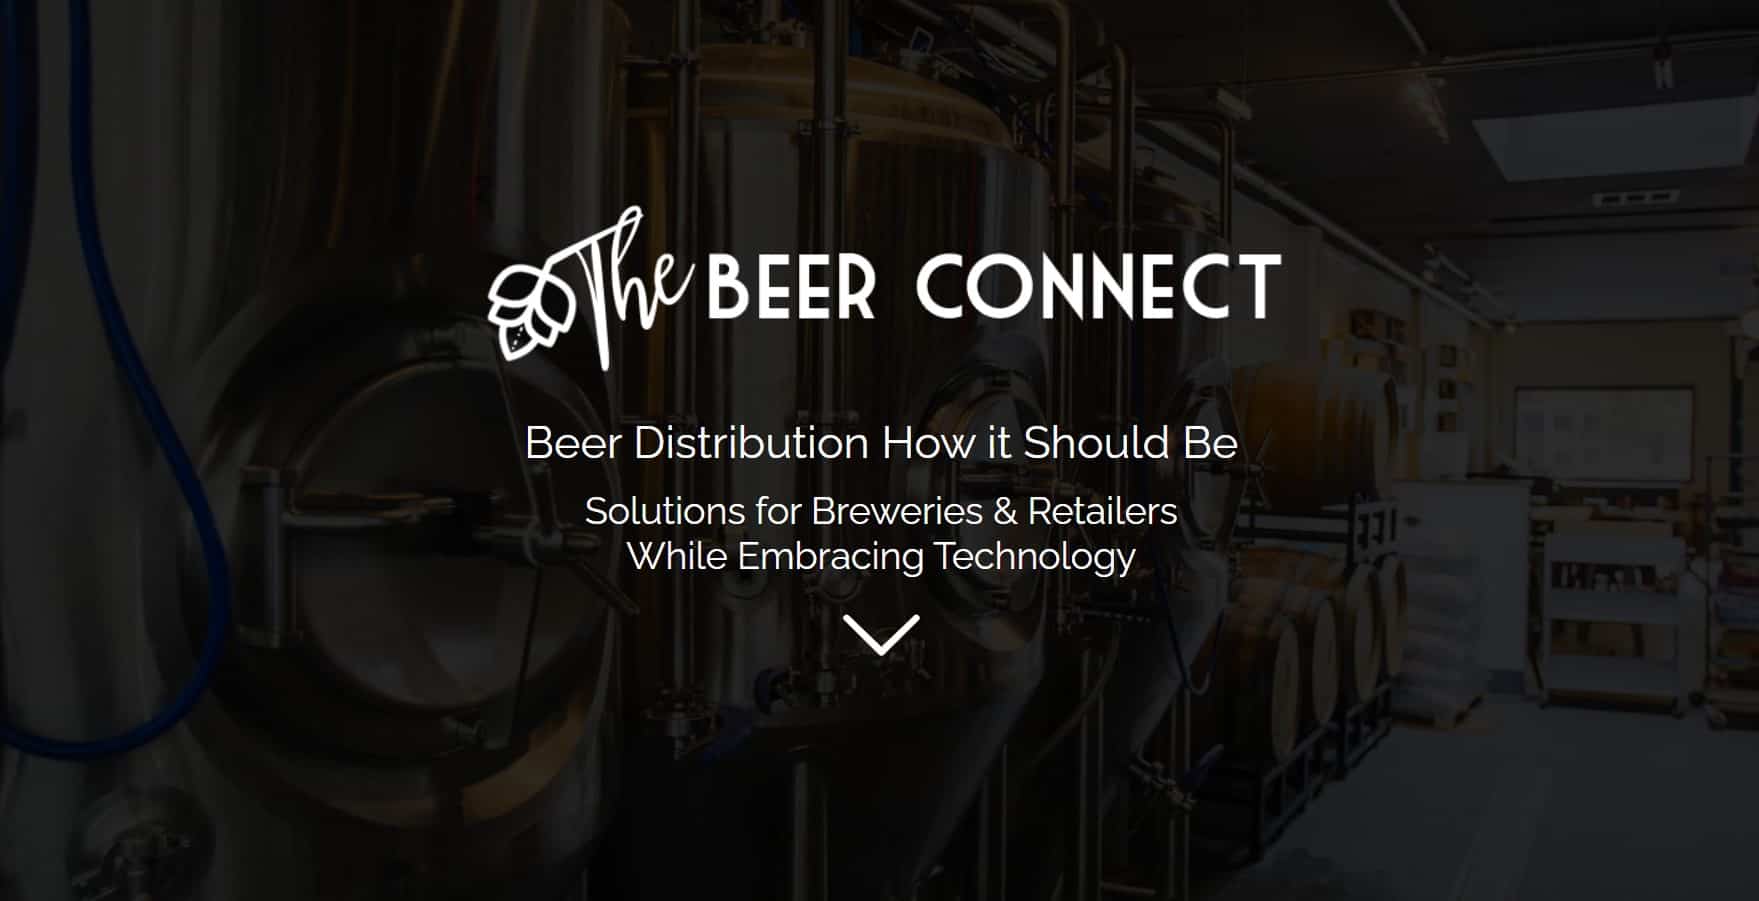 The Beer Connect